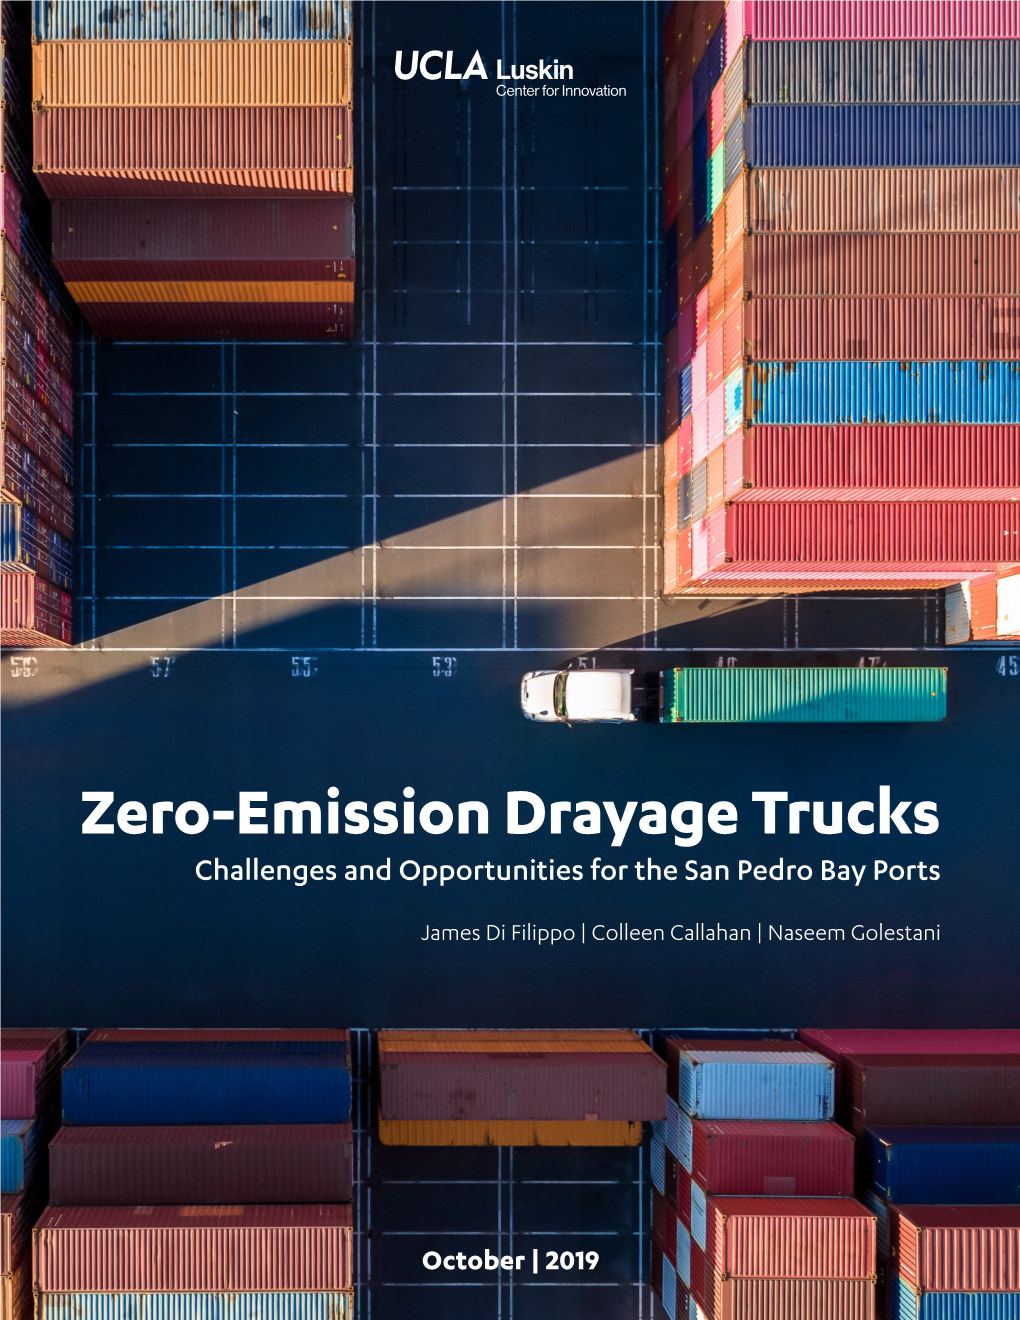 Zero-Emission Drayage Trucks Challenges and Opportunities for the San Pedro Bay Ports